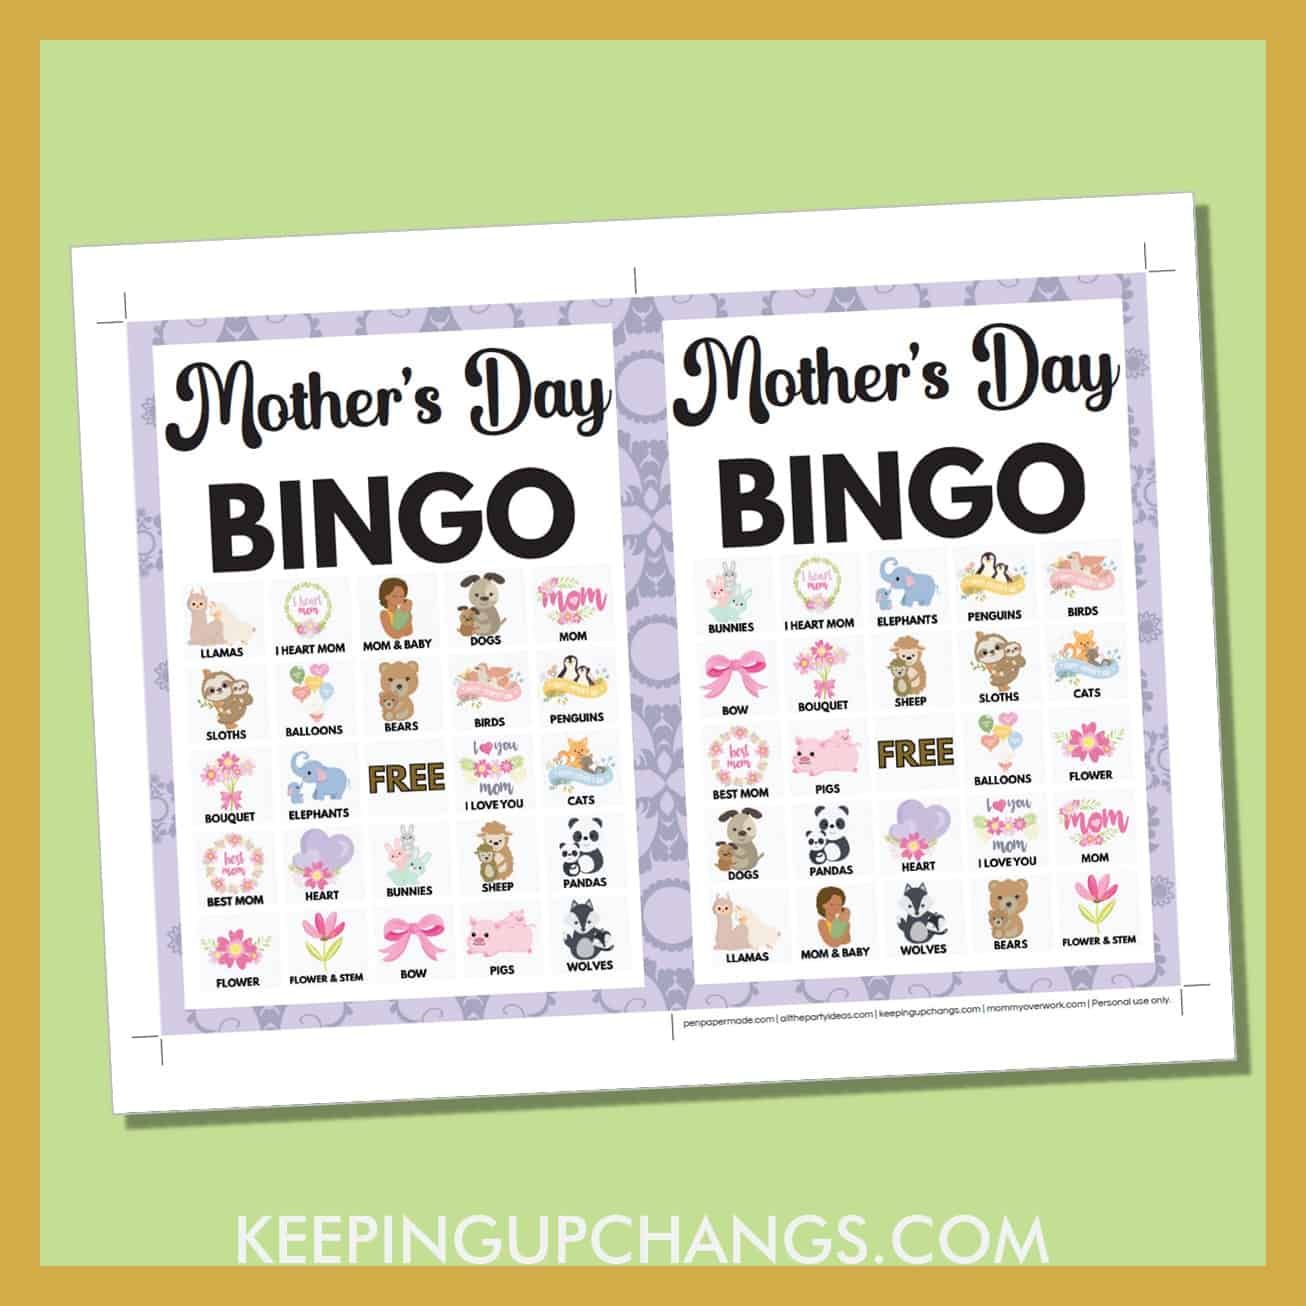 free mother's day bingo card 5x5 5x7 game boards with images and text words.